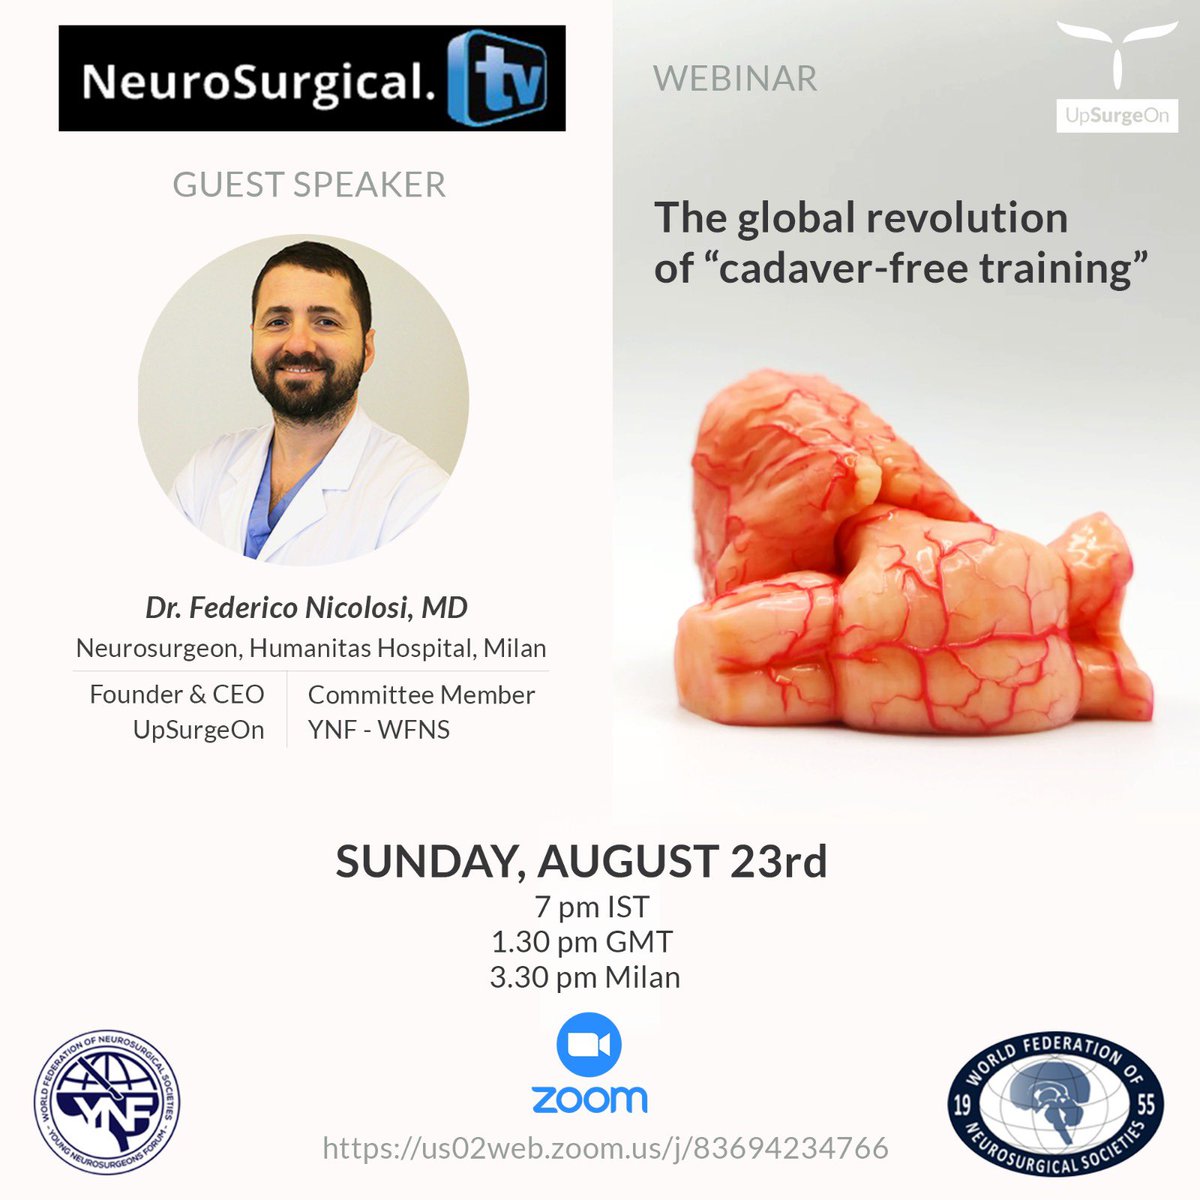 Podcast from Miami, Neurosurgical TV: Dr. Federico Nicolosi, UpSurgeOn founder, will give a lecture entitled 'The global revolution of cadaver-free training'. Sunday 23rd August 2020 at 1.30 PM GMT. us02web.zoom.us/j/83694234766 #neurosurgery #training #humanbrain #medtech